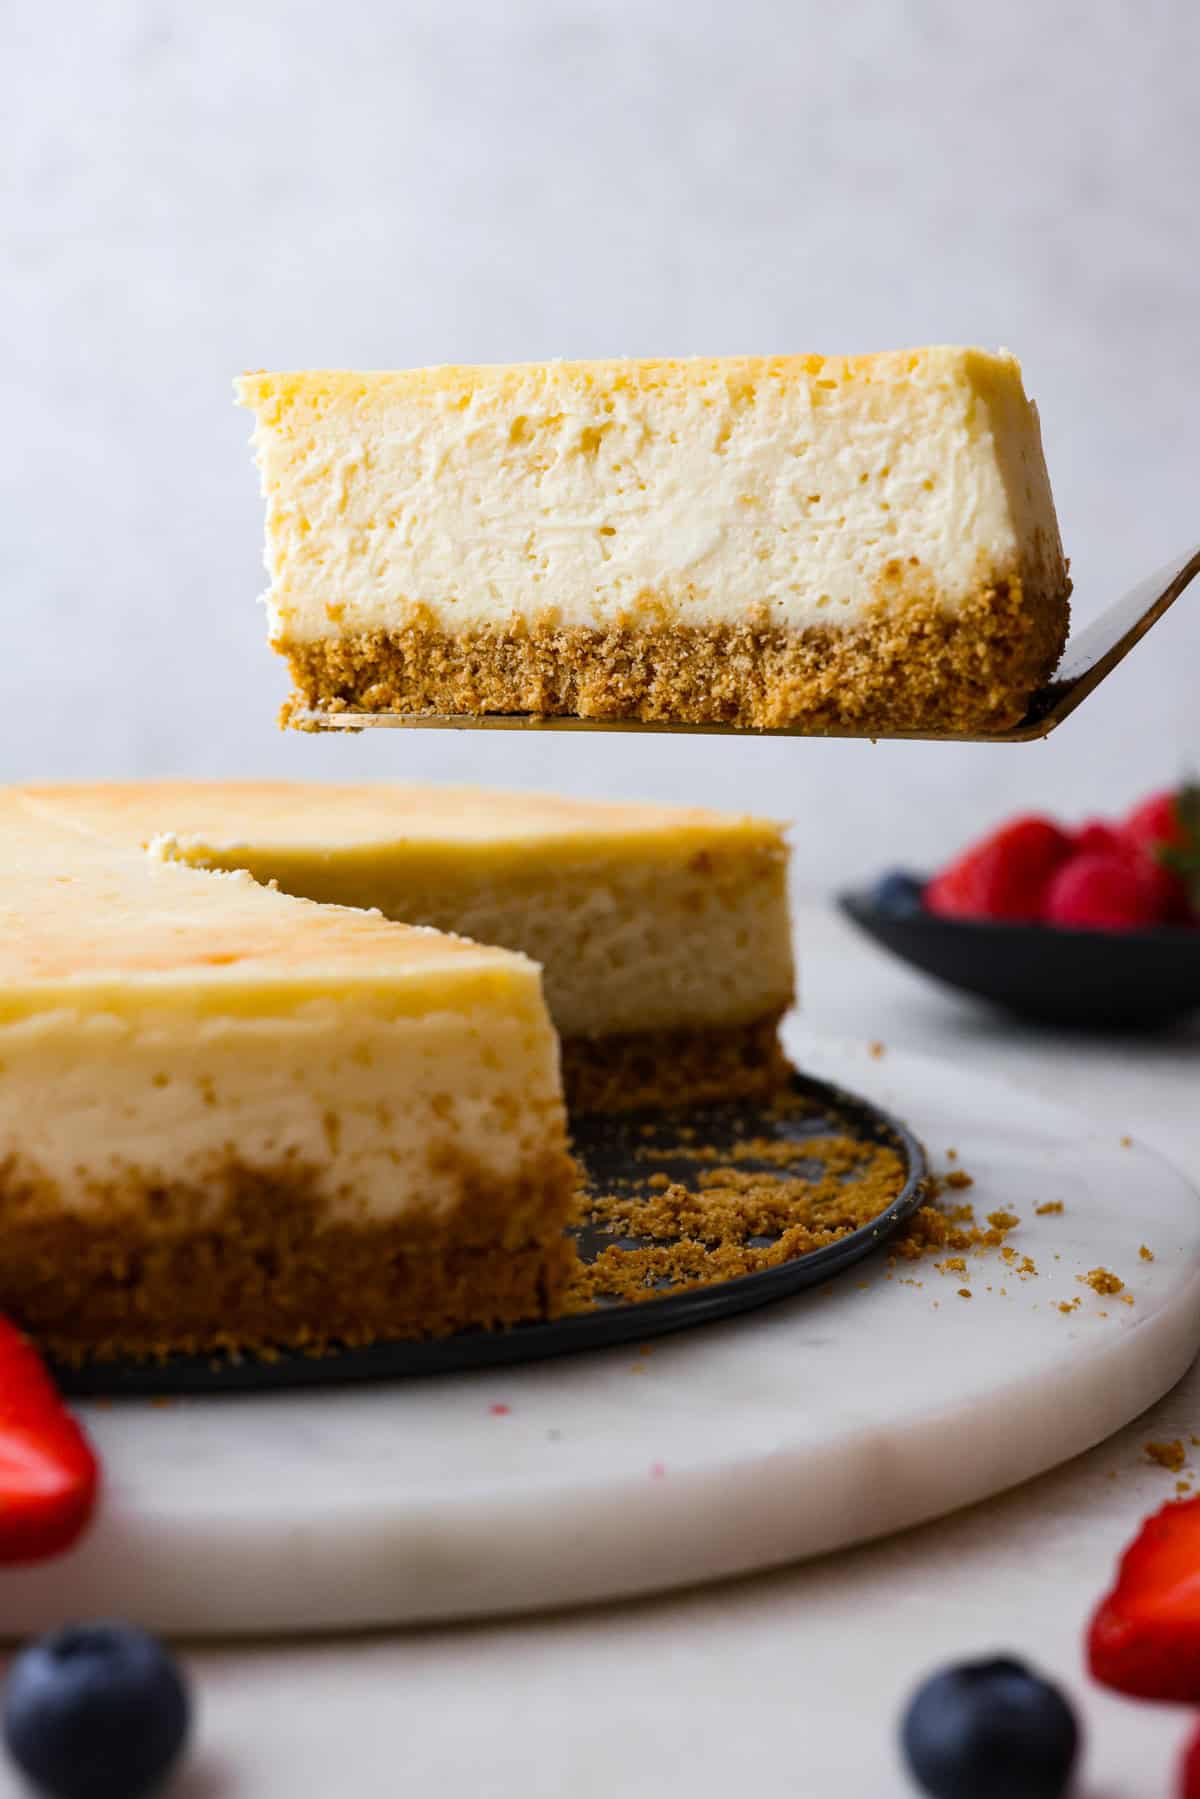 How to Make Cheesecake (The Ultimate Guide)